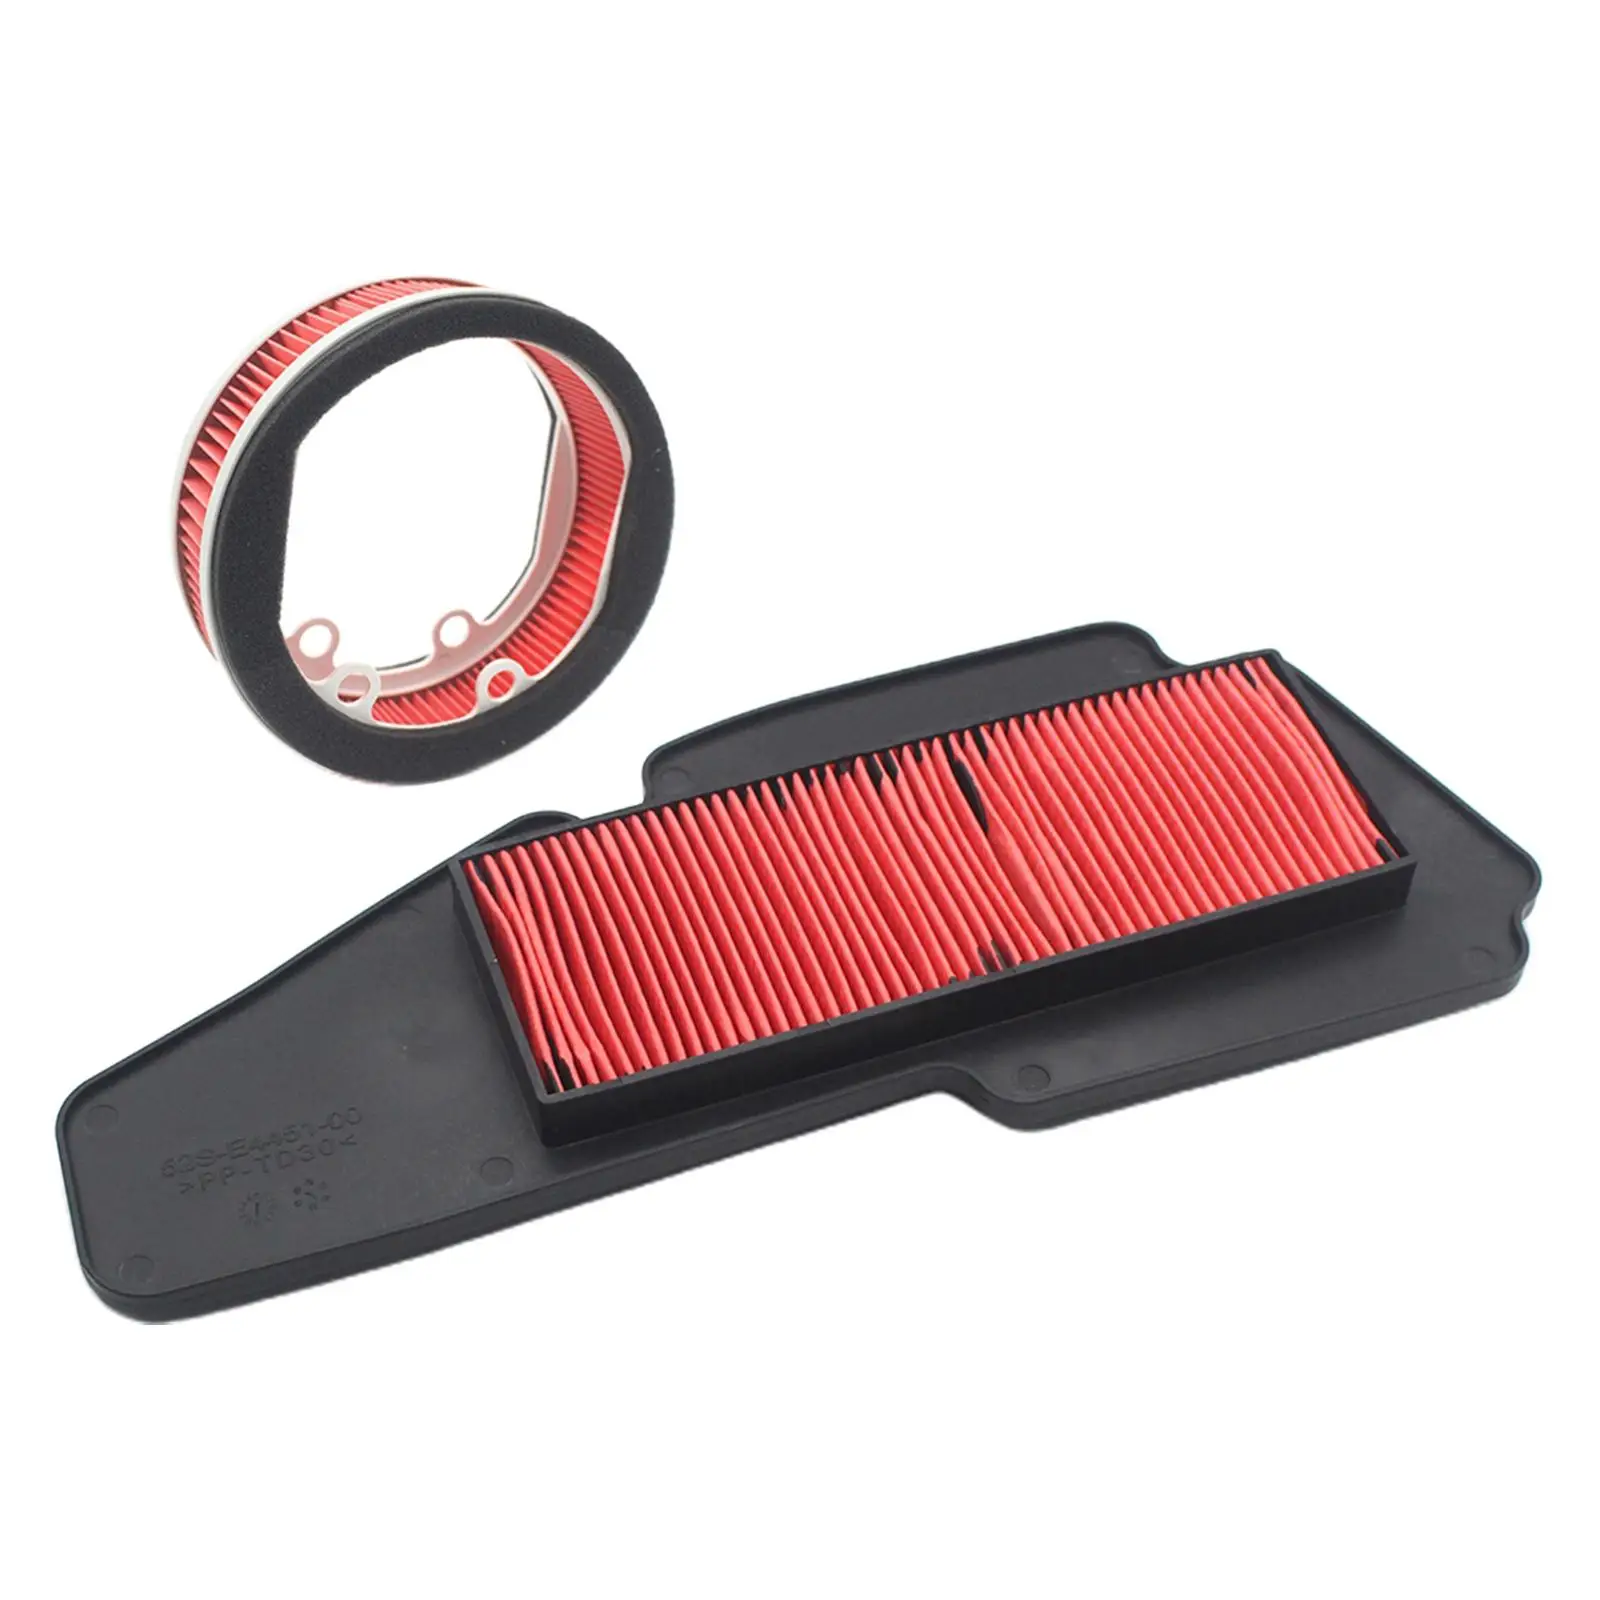 Plastic Motorcycle Air Filter for 155 55 155 VIGOR 155 175